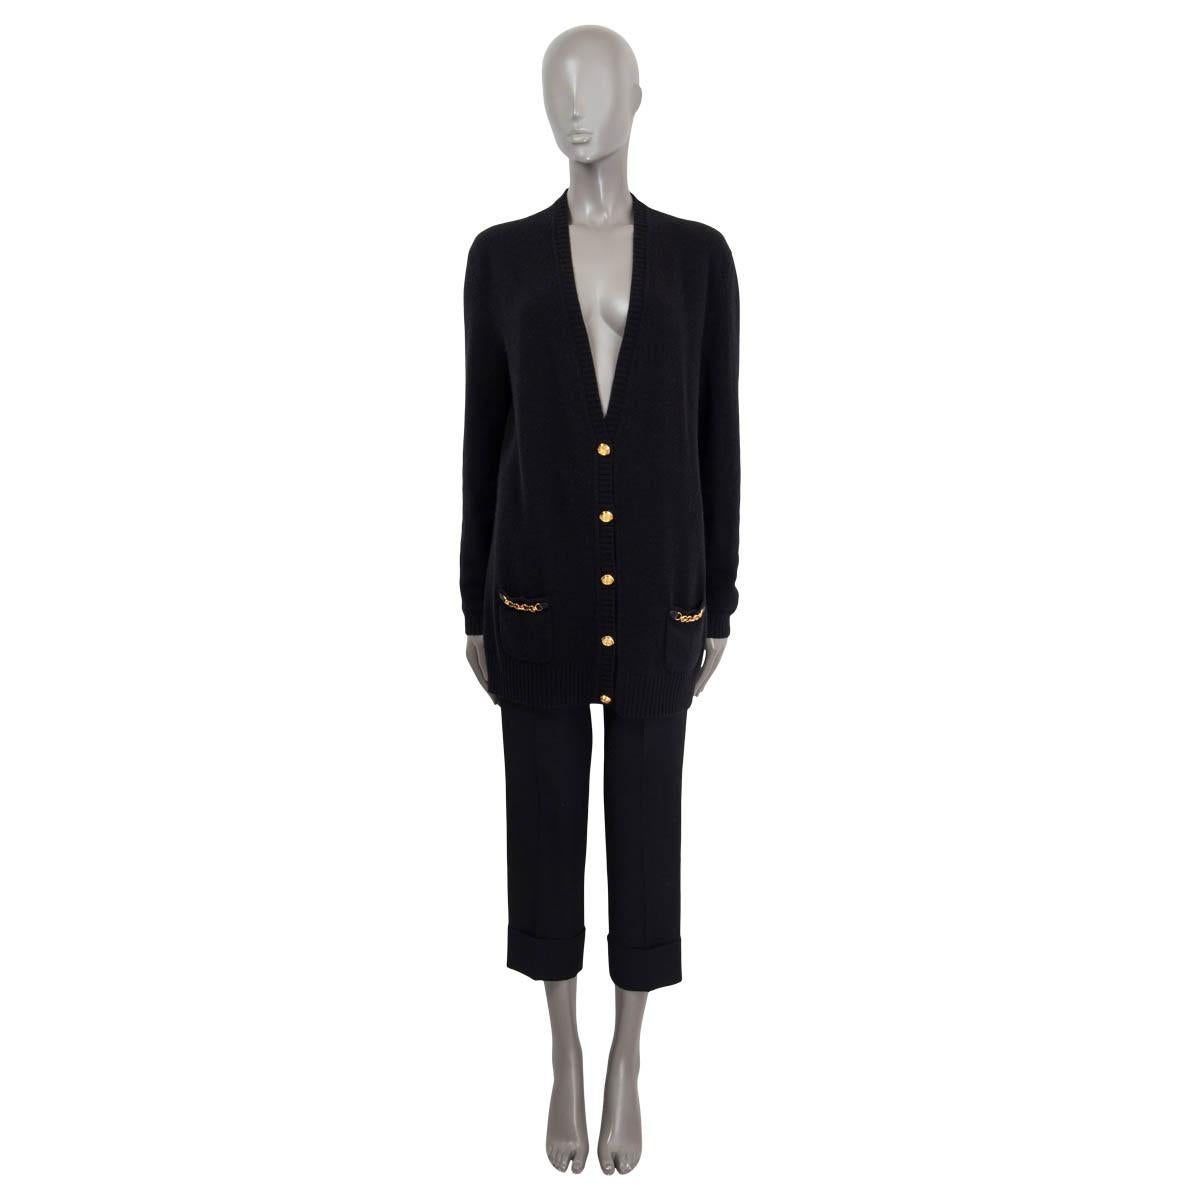 100% authentic Gucci cardigan black cashmere (100%). Features two patch pockets with chain details, gold-tone buttons and a long-line cut. Has been worn and is in excellent condition.

2021 Spring/Summer Ouverture Collection.

Measurements
Tag